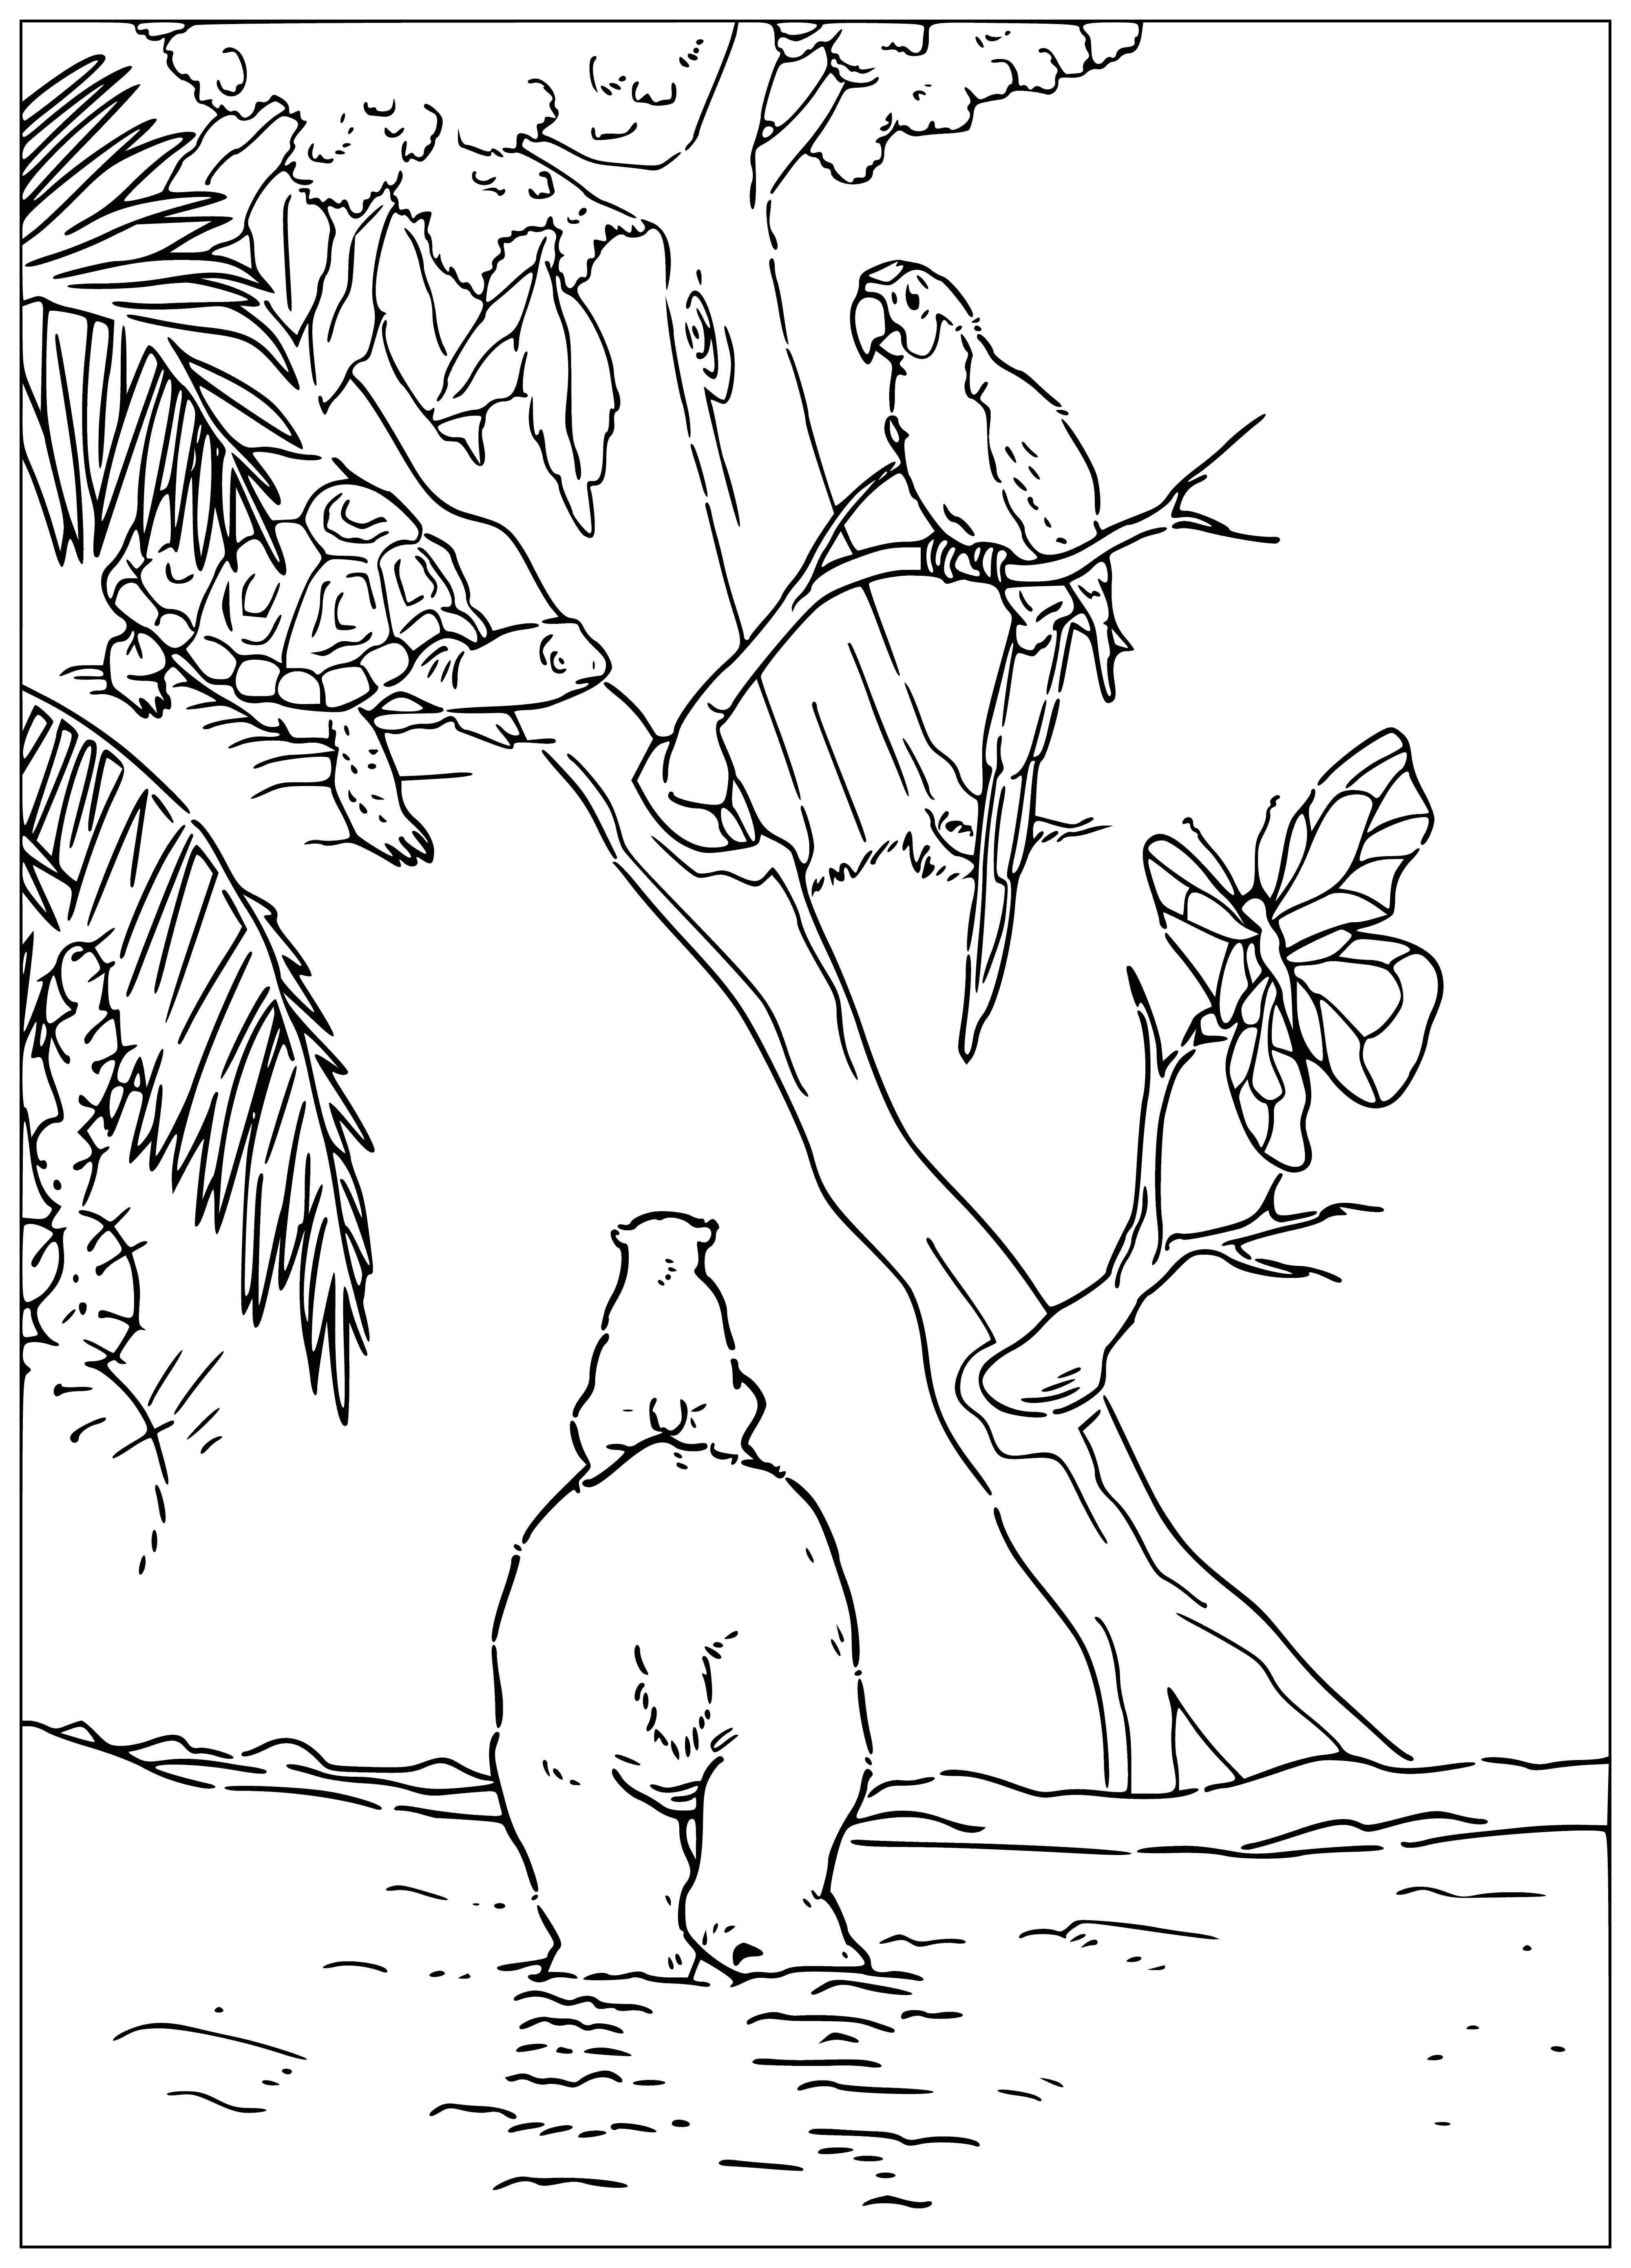 coloring page: Lars the polar bear enjoys a sunny day swimming with a dolphin on a sandy beach.